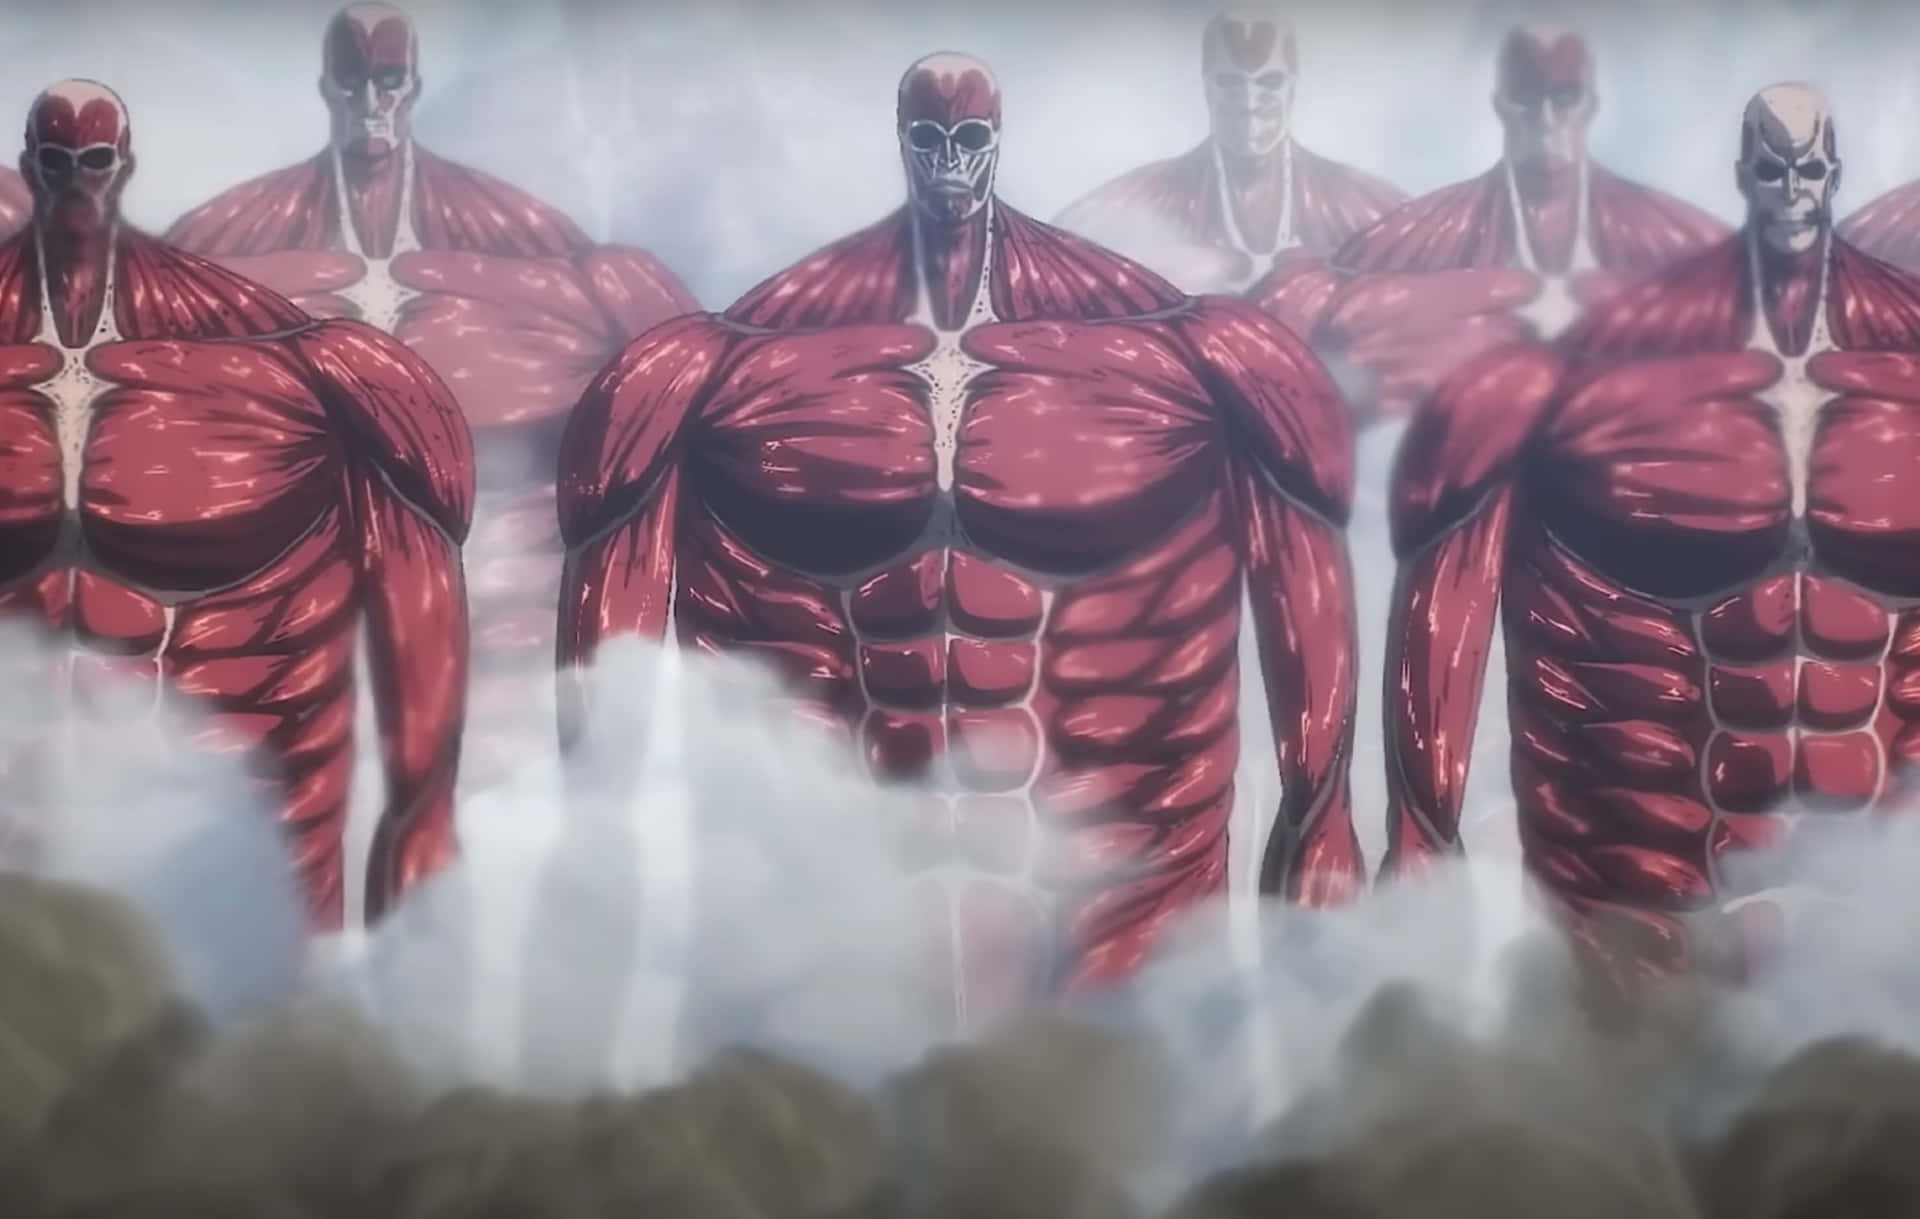 "Witness the power of salvation with Attack on Titan!"